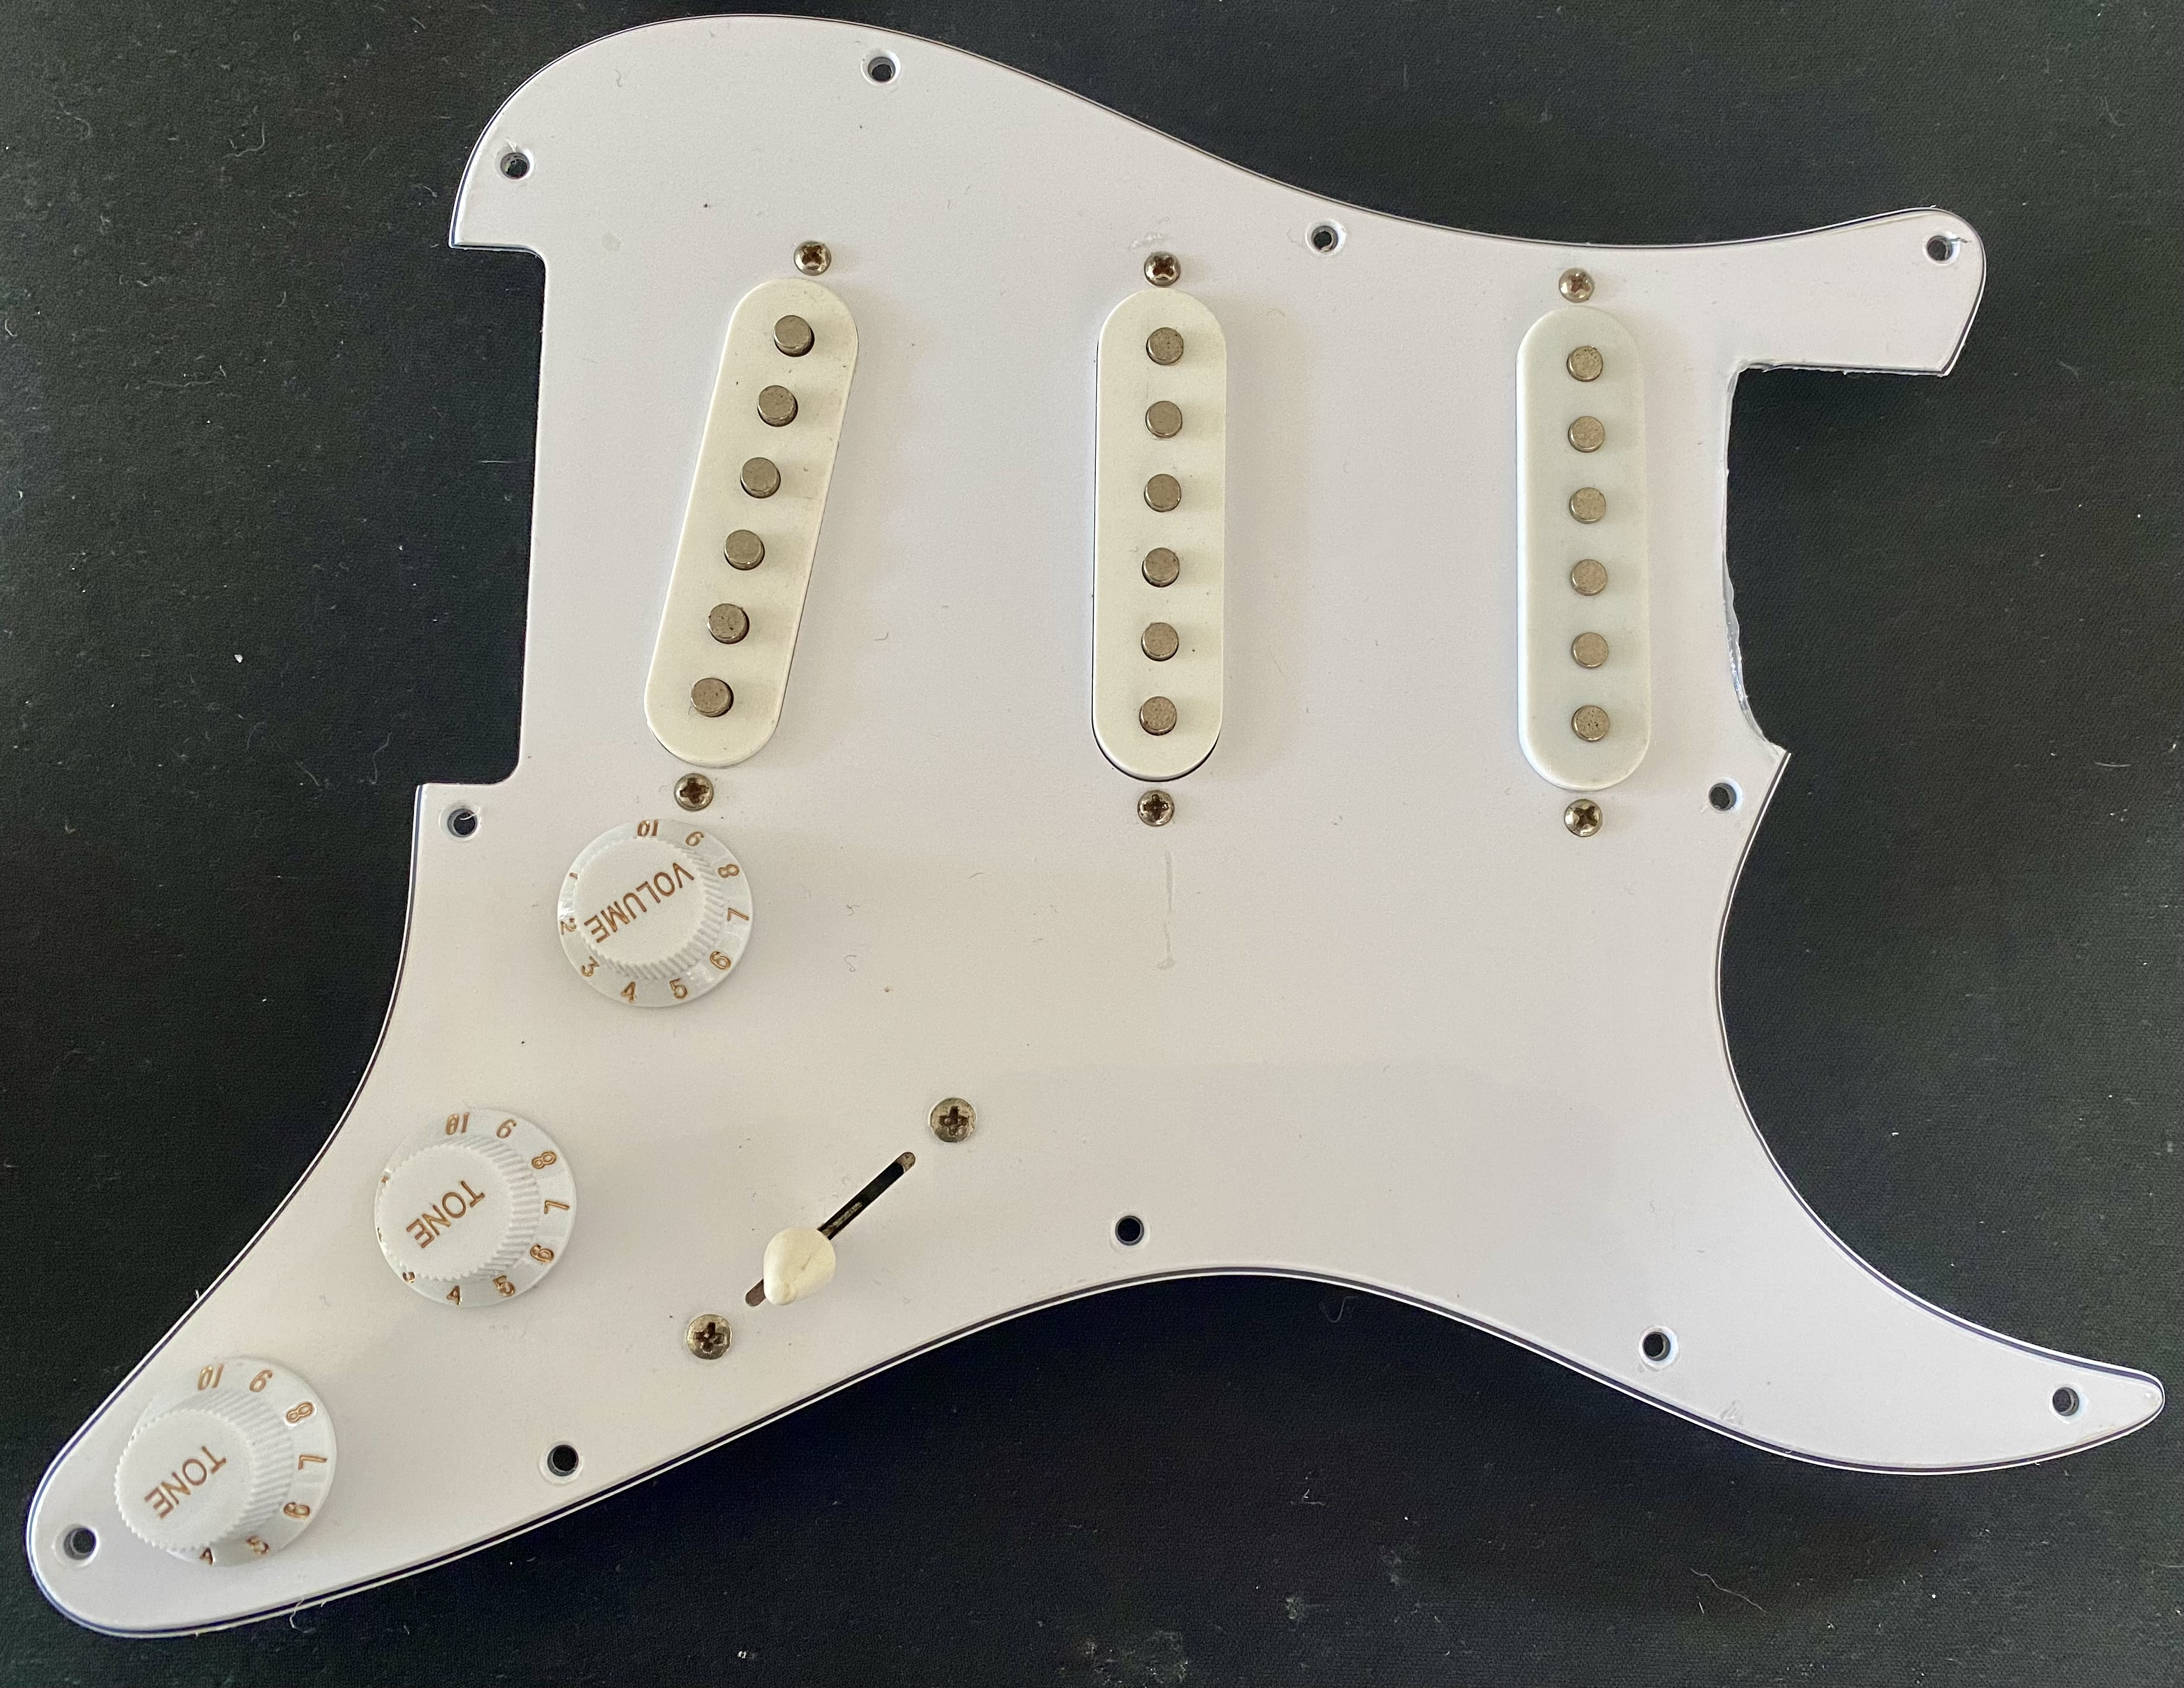 SE Squier Stratocaster Pickups on Scratchplate